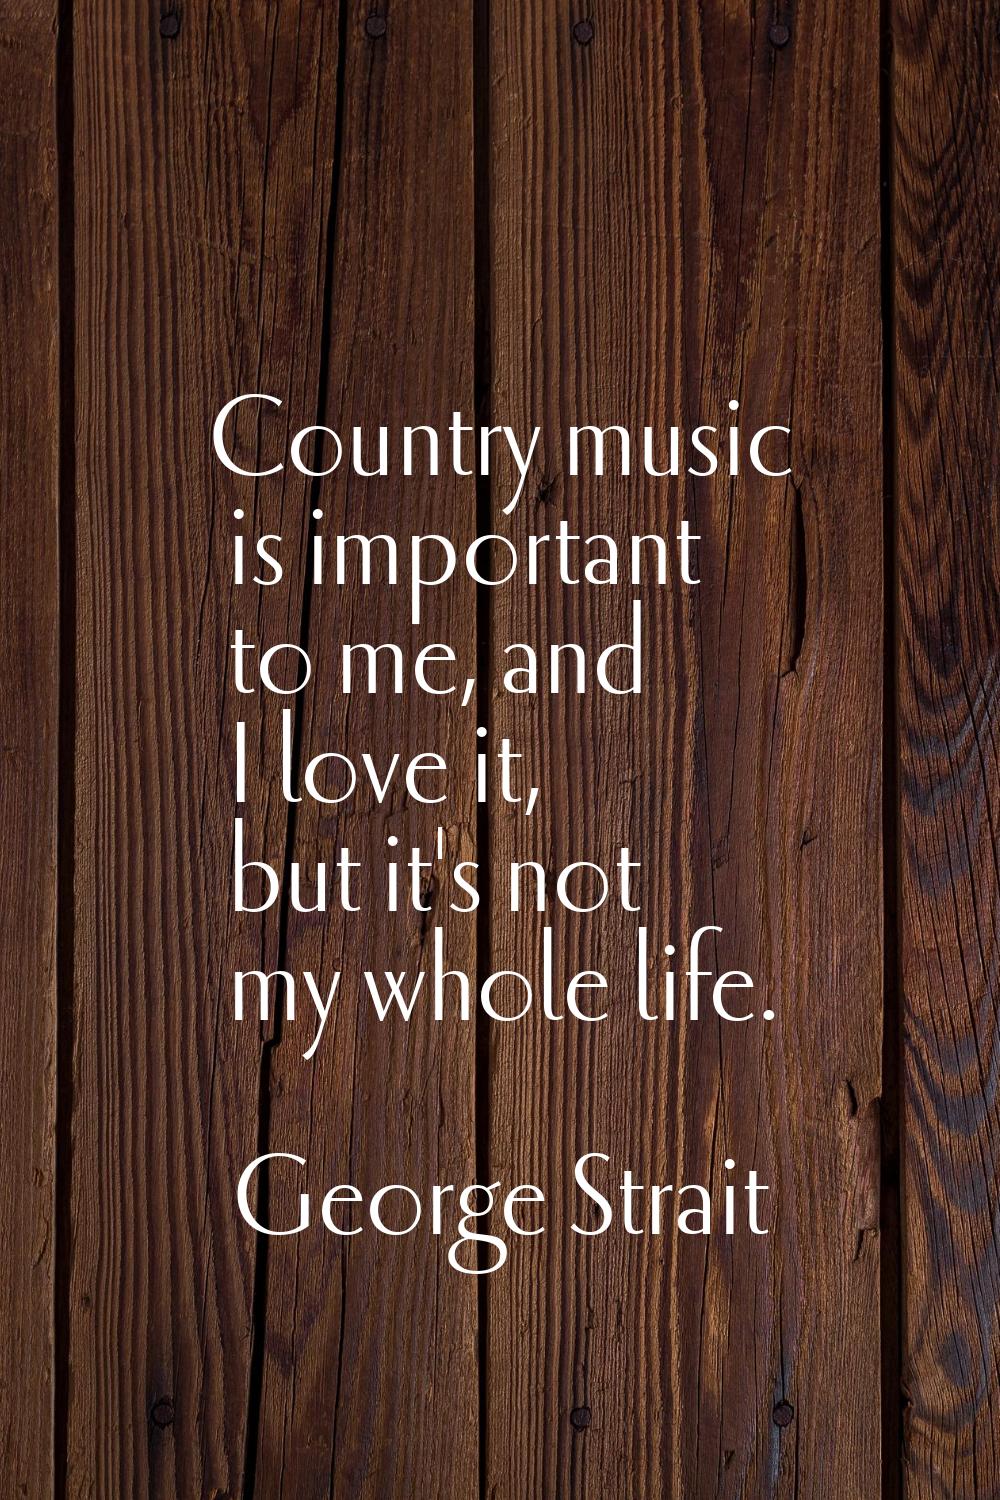 Country music is important to me, and I love it, but it's not my whole life.